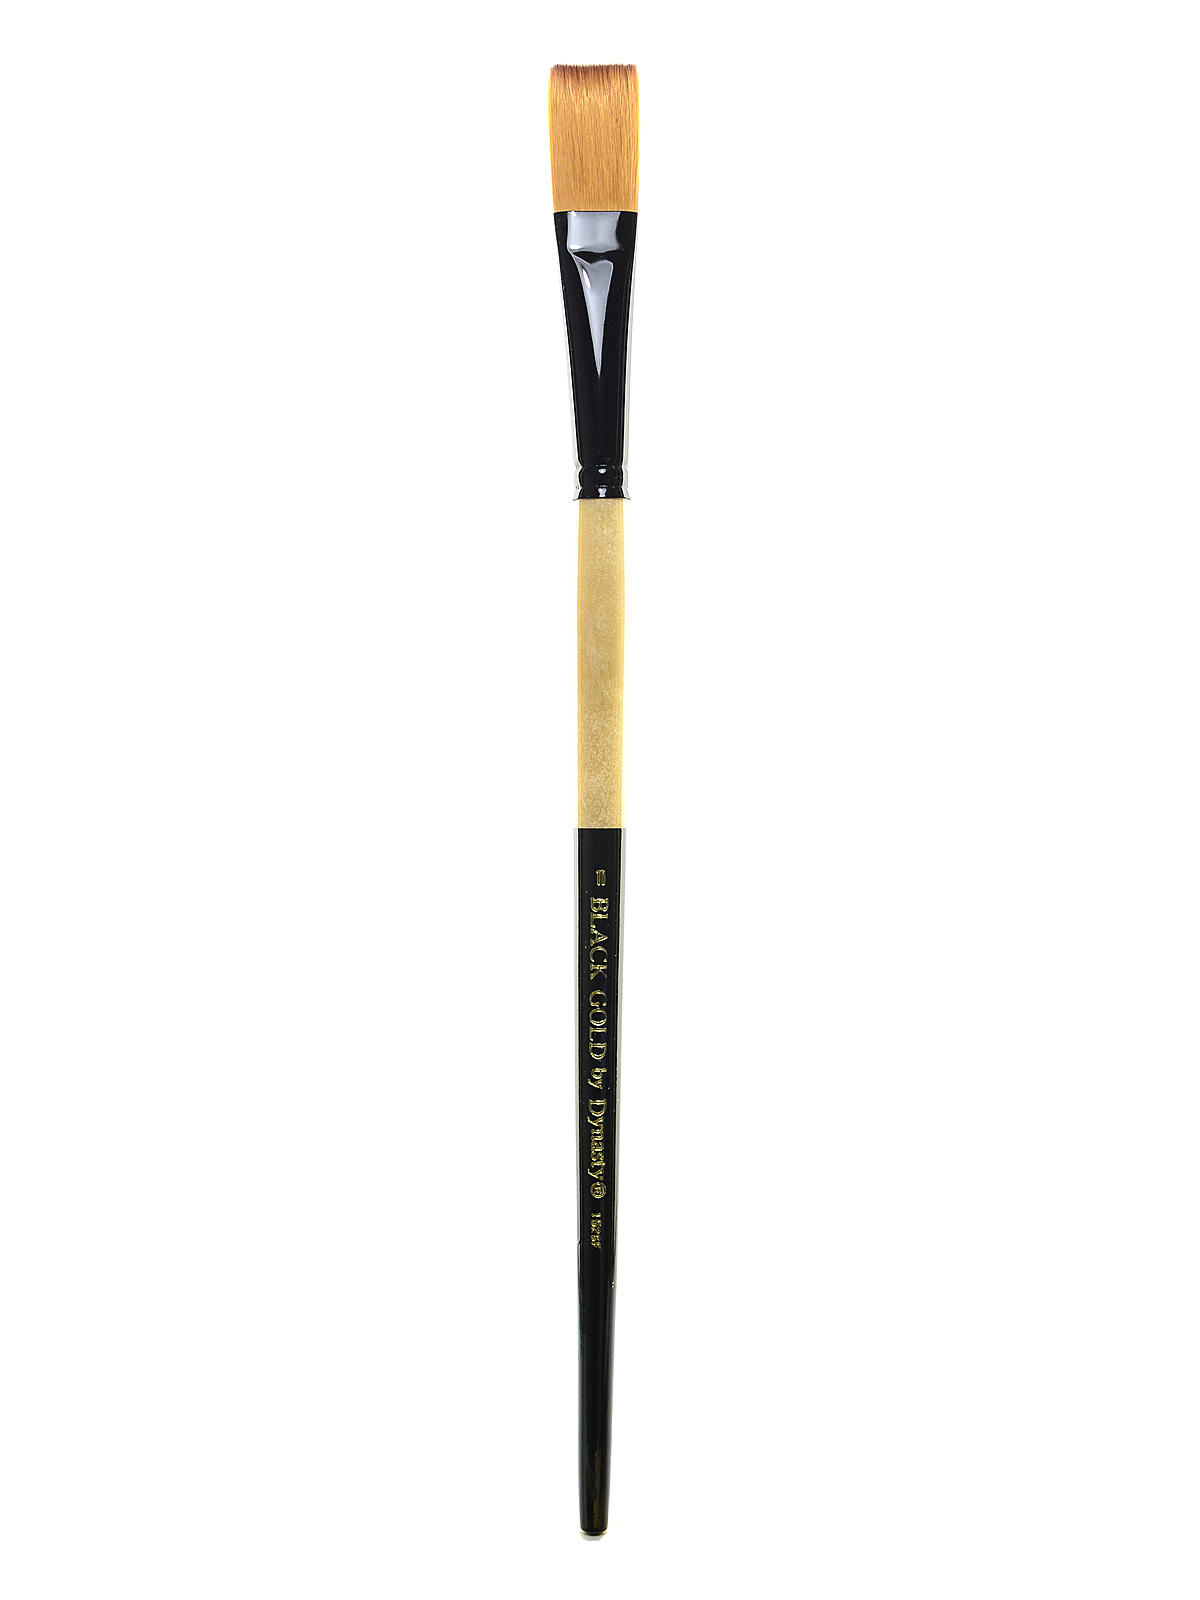 Black Gold Series Long Handled Synthetic Brushes 10 Flat 1526f